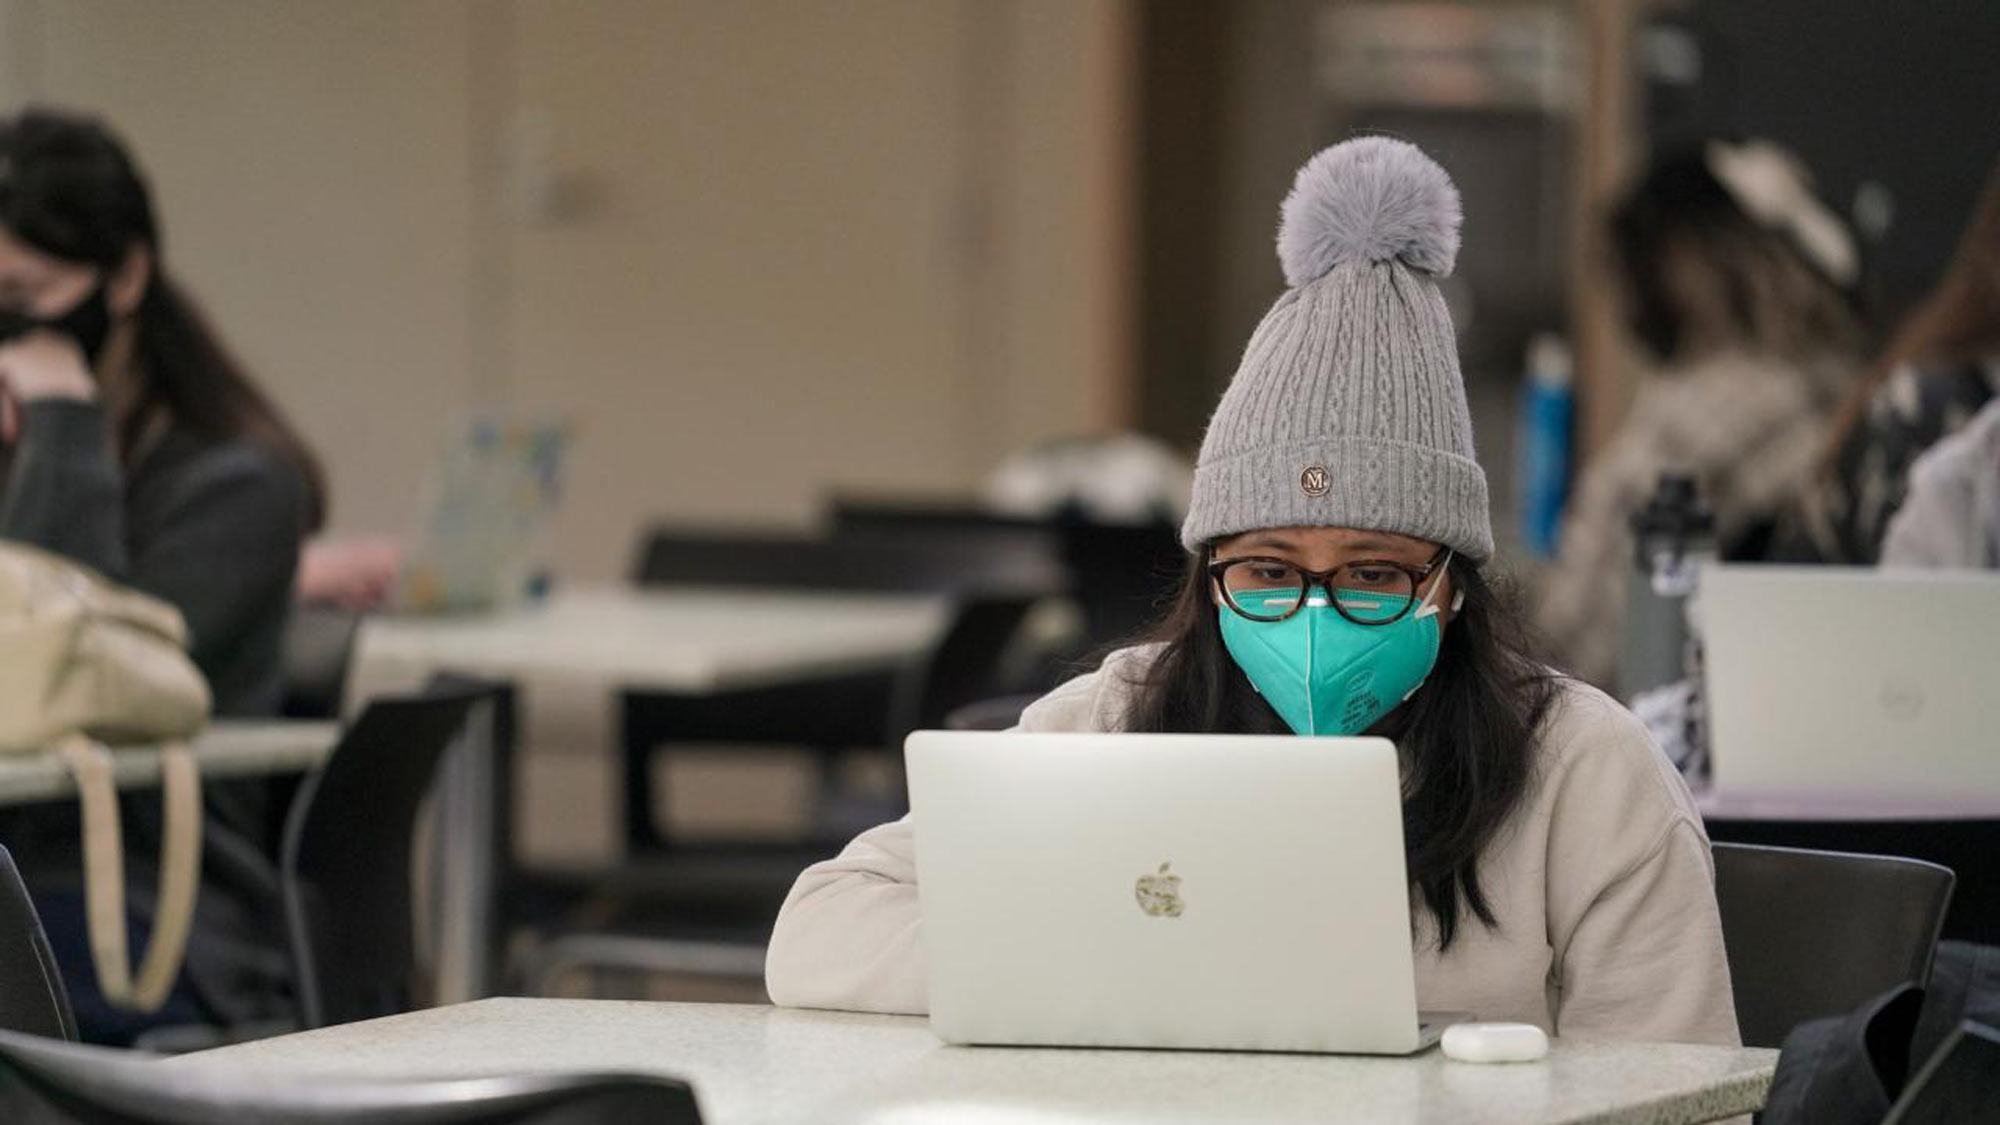 Woman, masked and wearing a knit cap, works at laptop